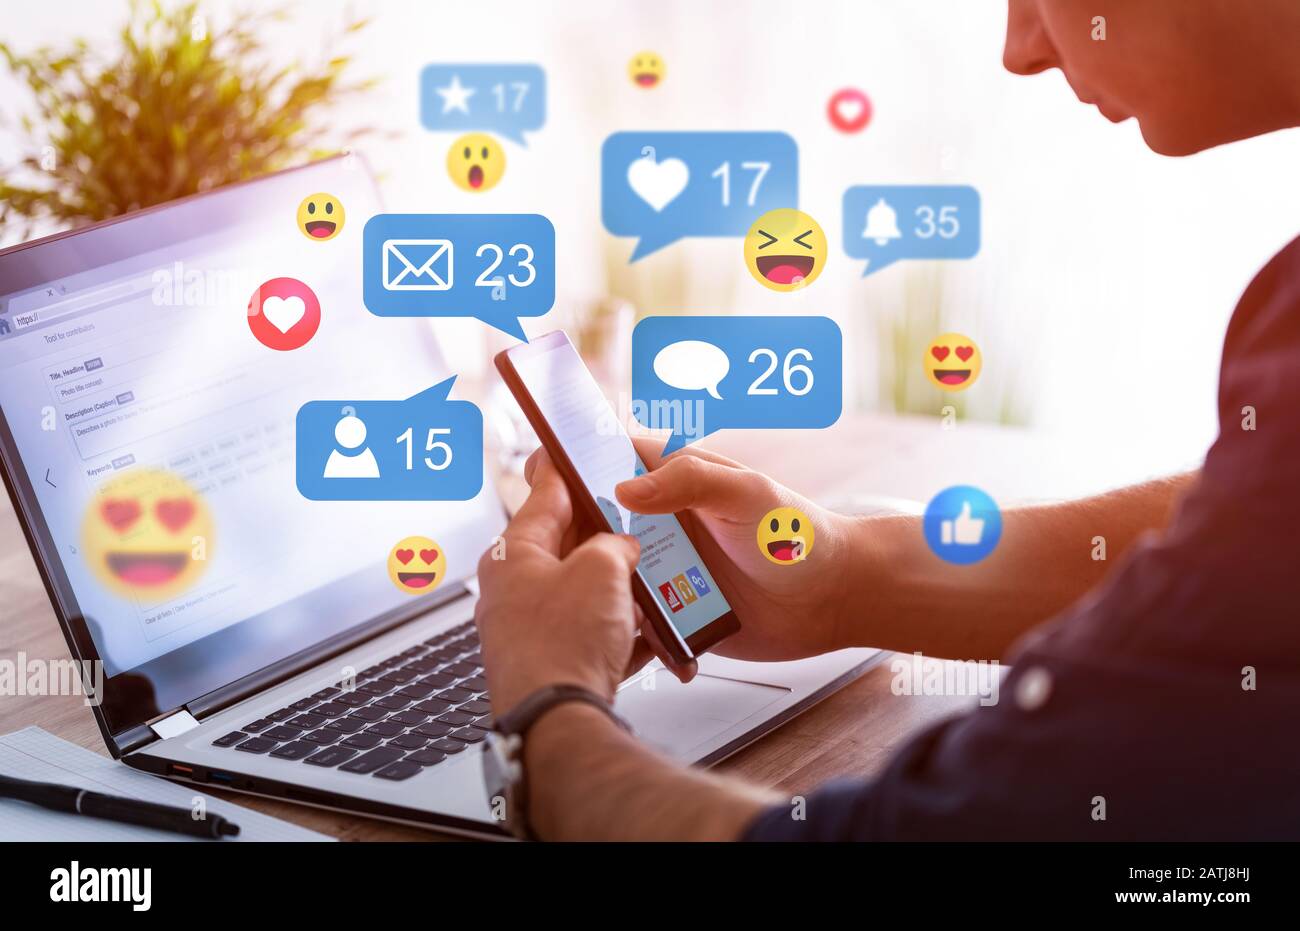 Like and share social media. Hands holding smartphone with social media network icons. Marketing concept. Stock Photo